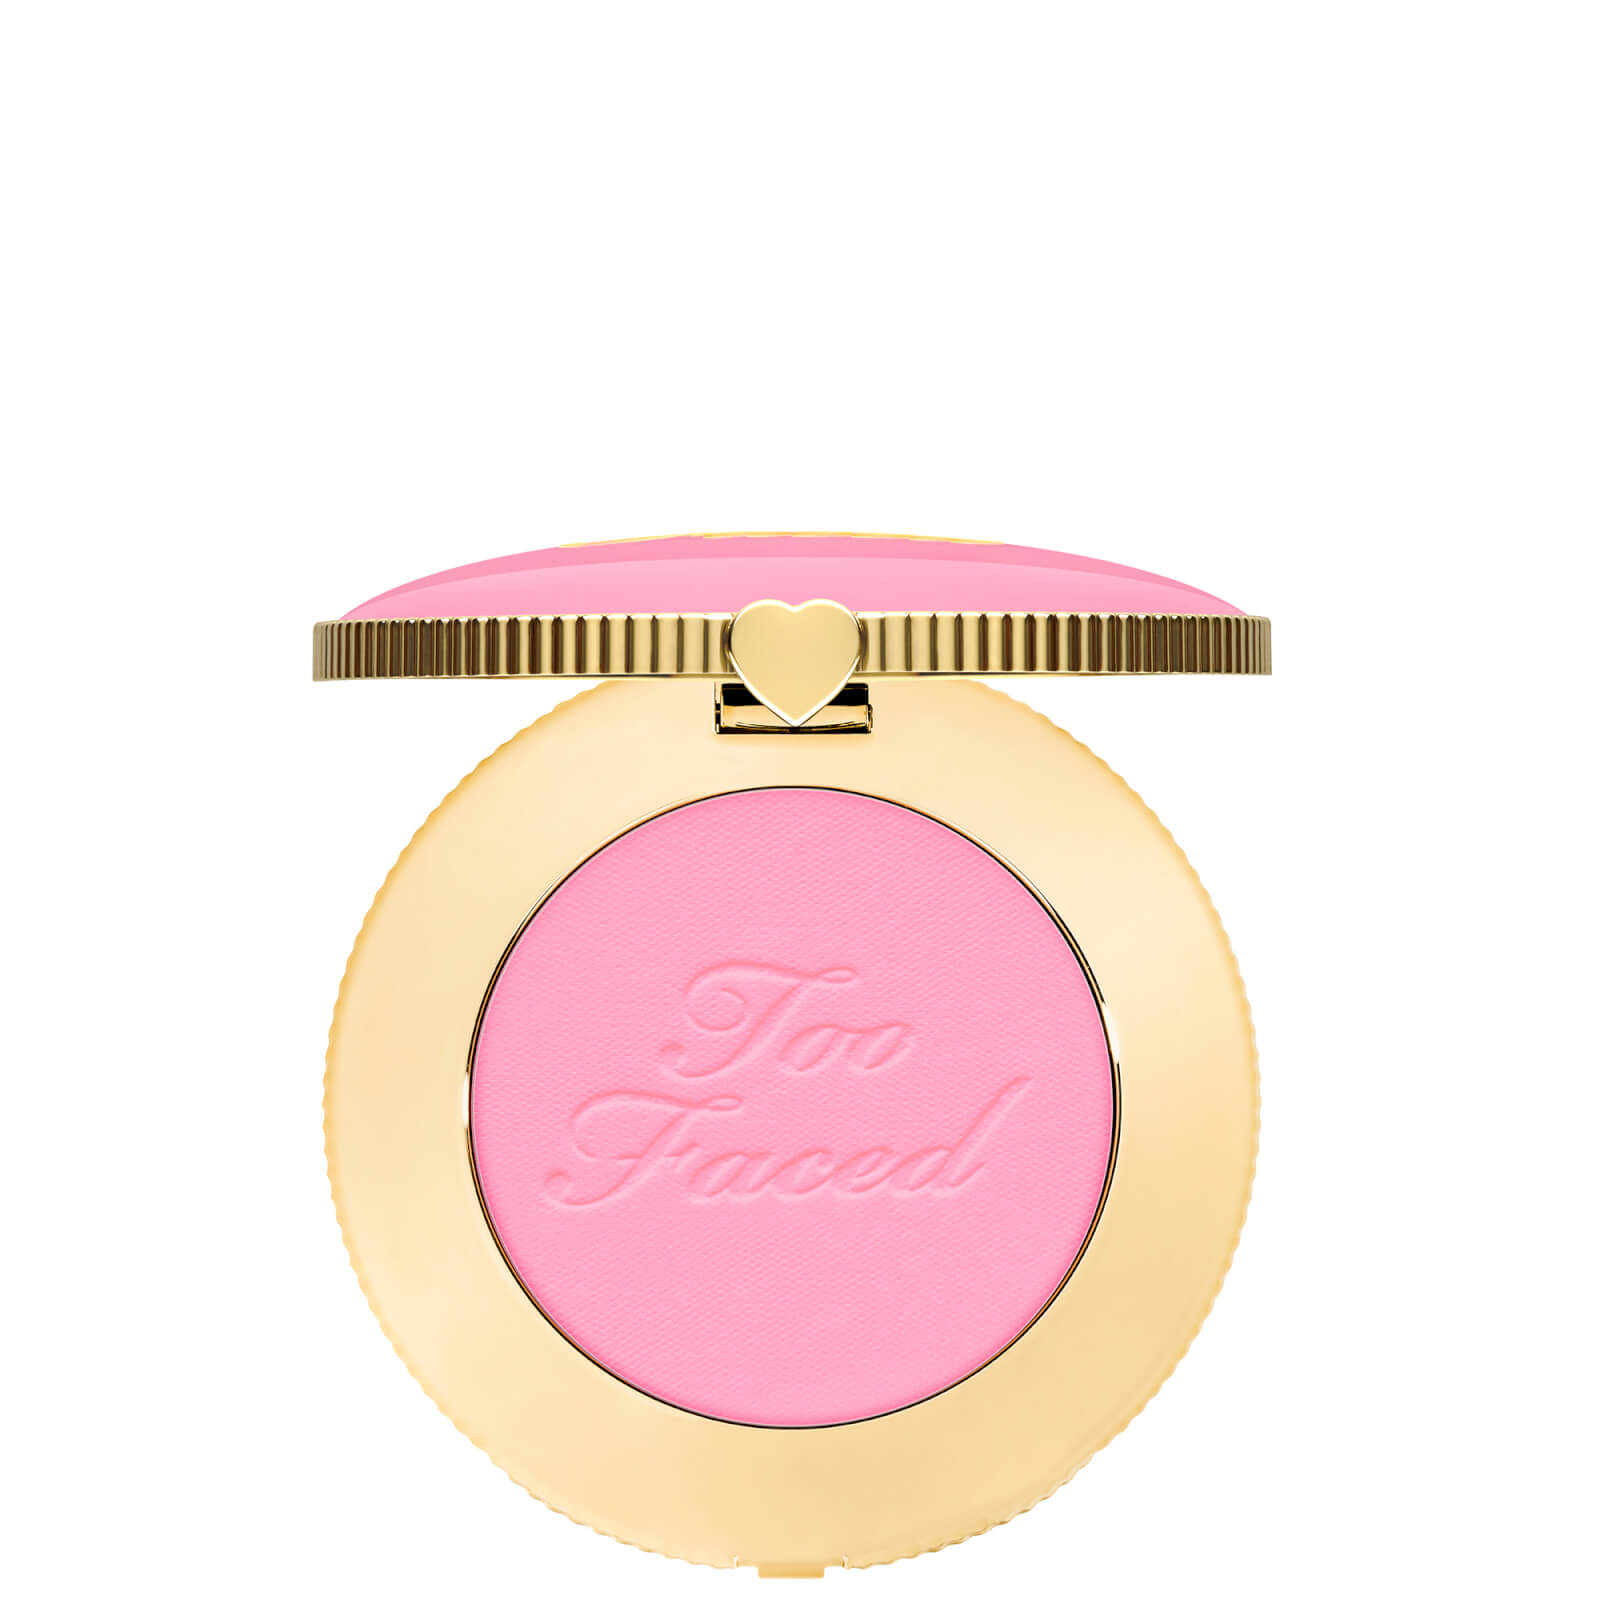 Too Faced Cloud Crush Blush 5g (Various Shades) - Candy Clouds